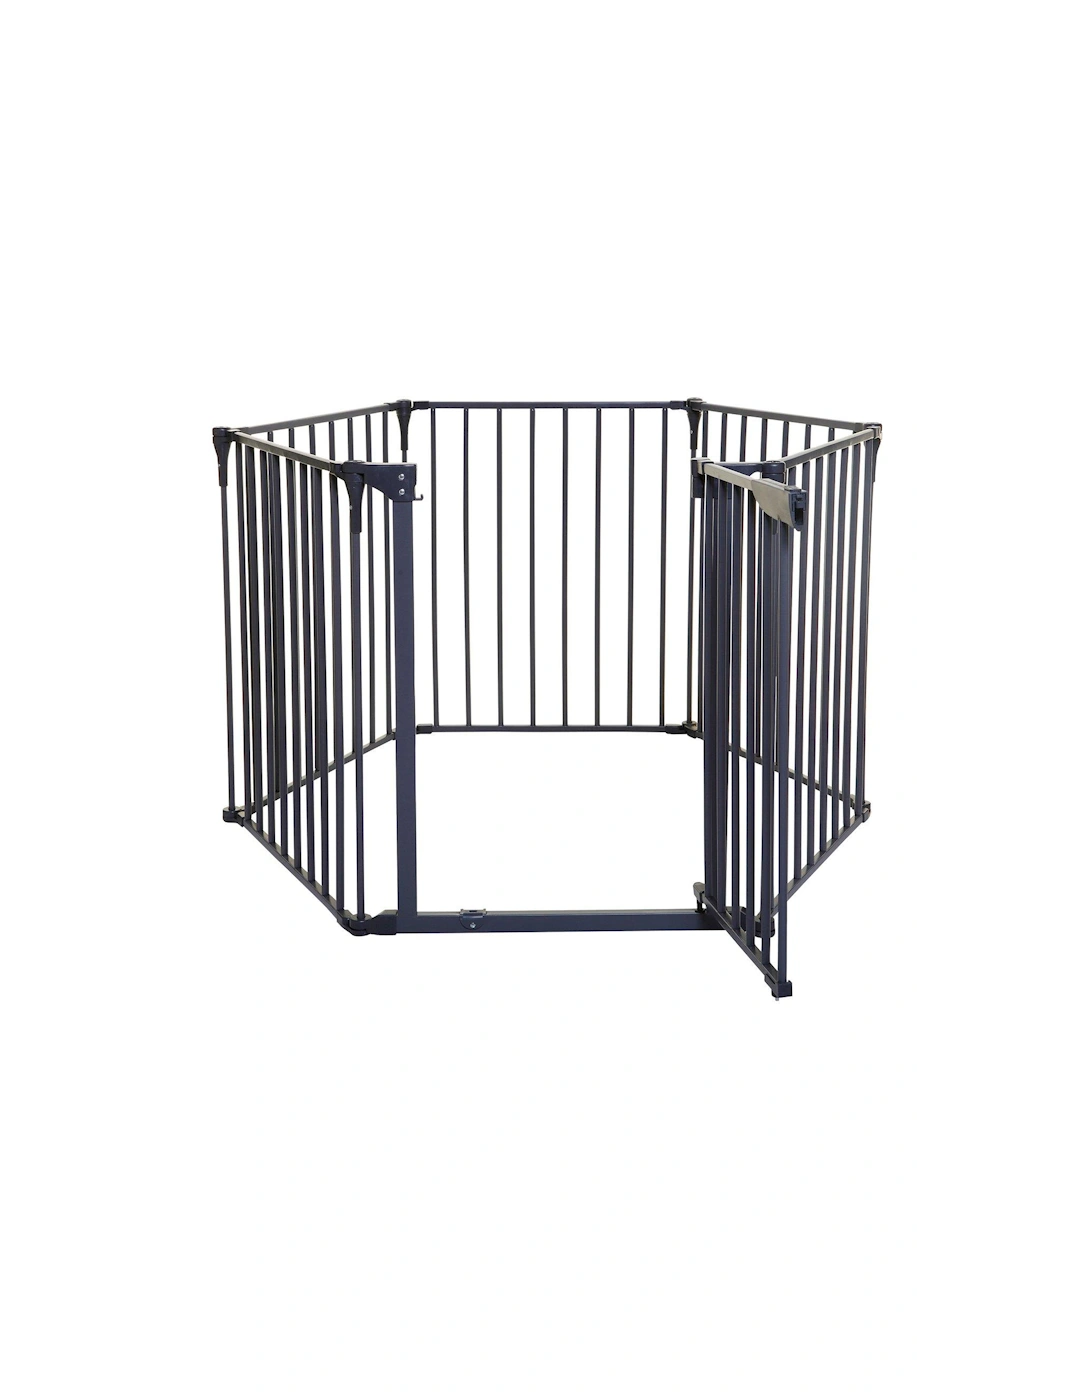 Royale Converta 3-in-1 Metal Playpen/ Fire Barrier - Charcoal